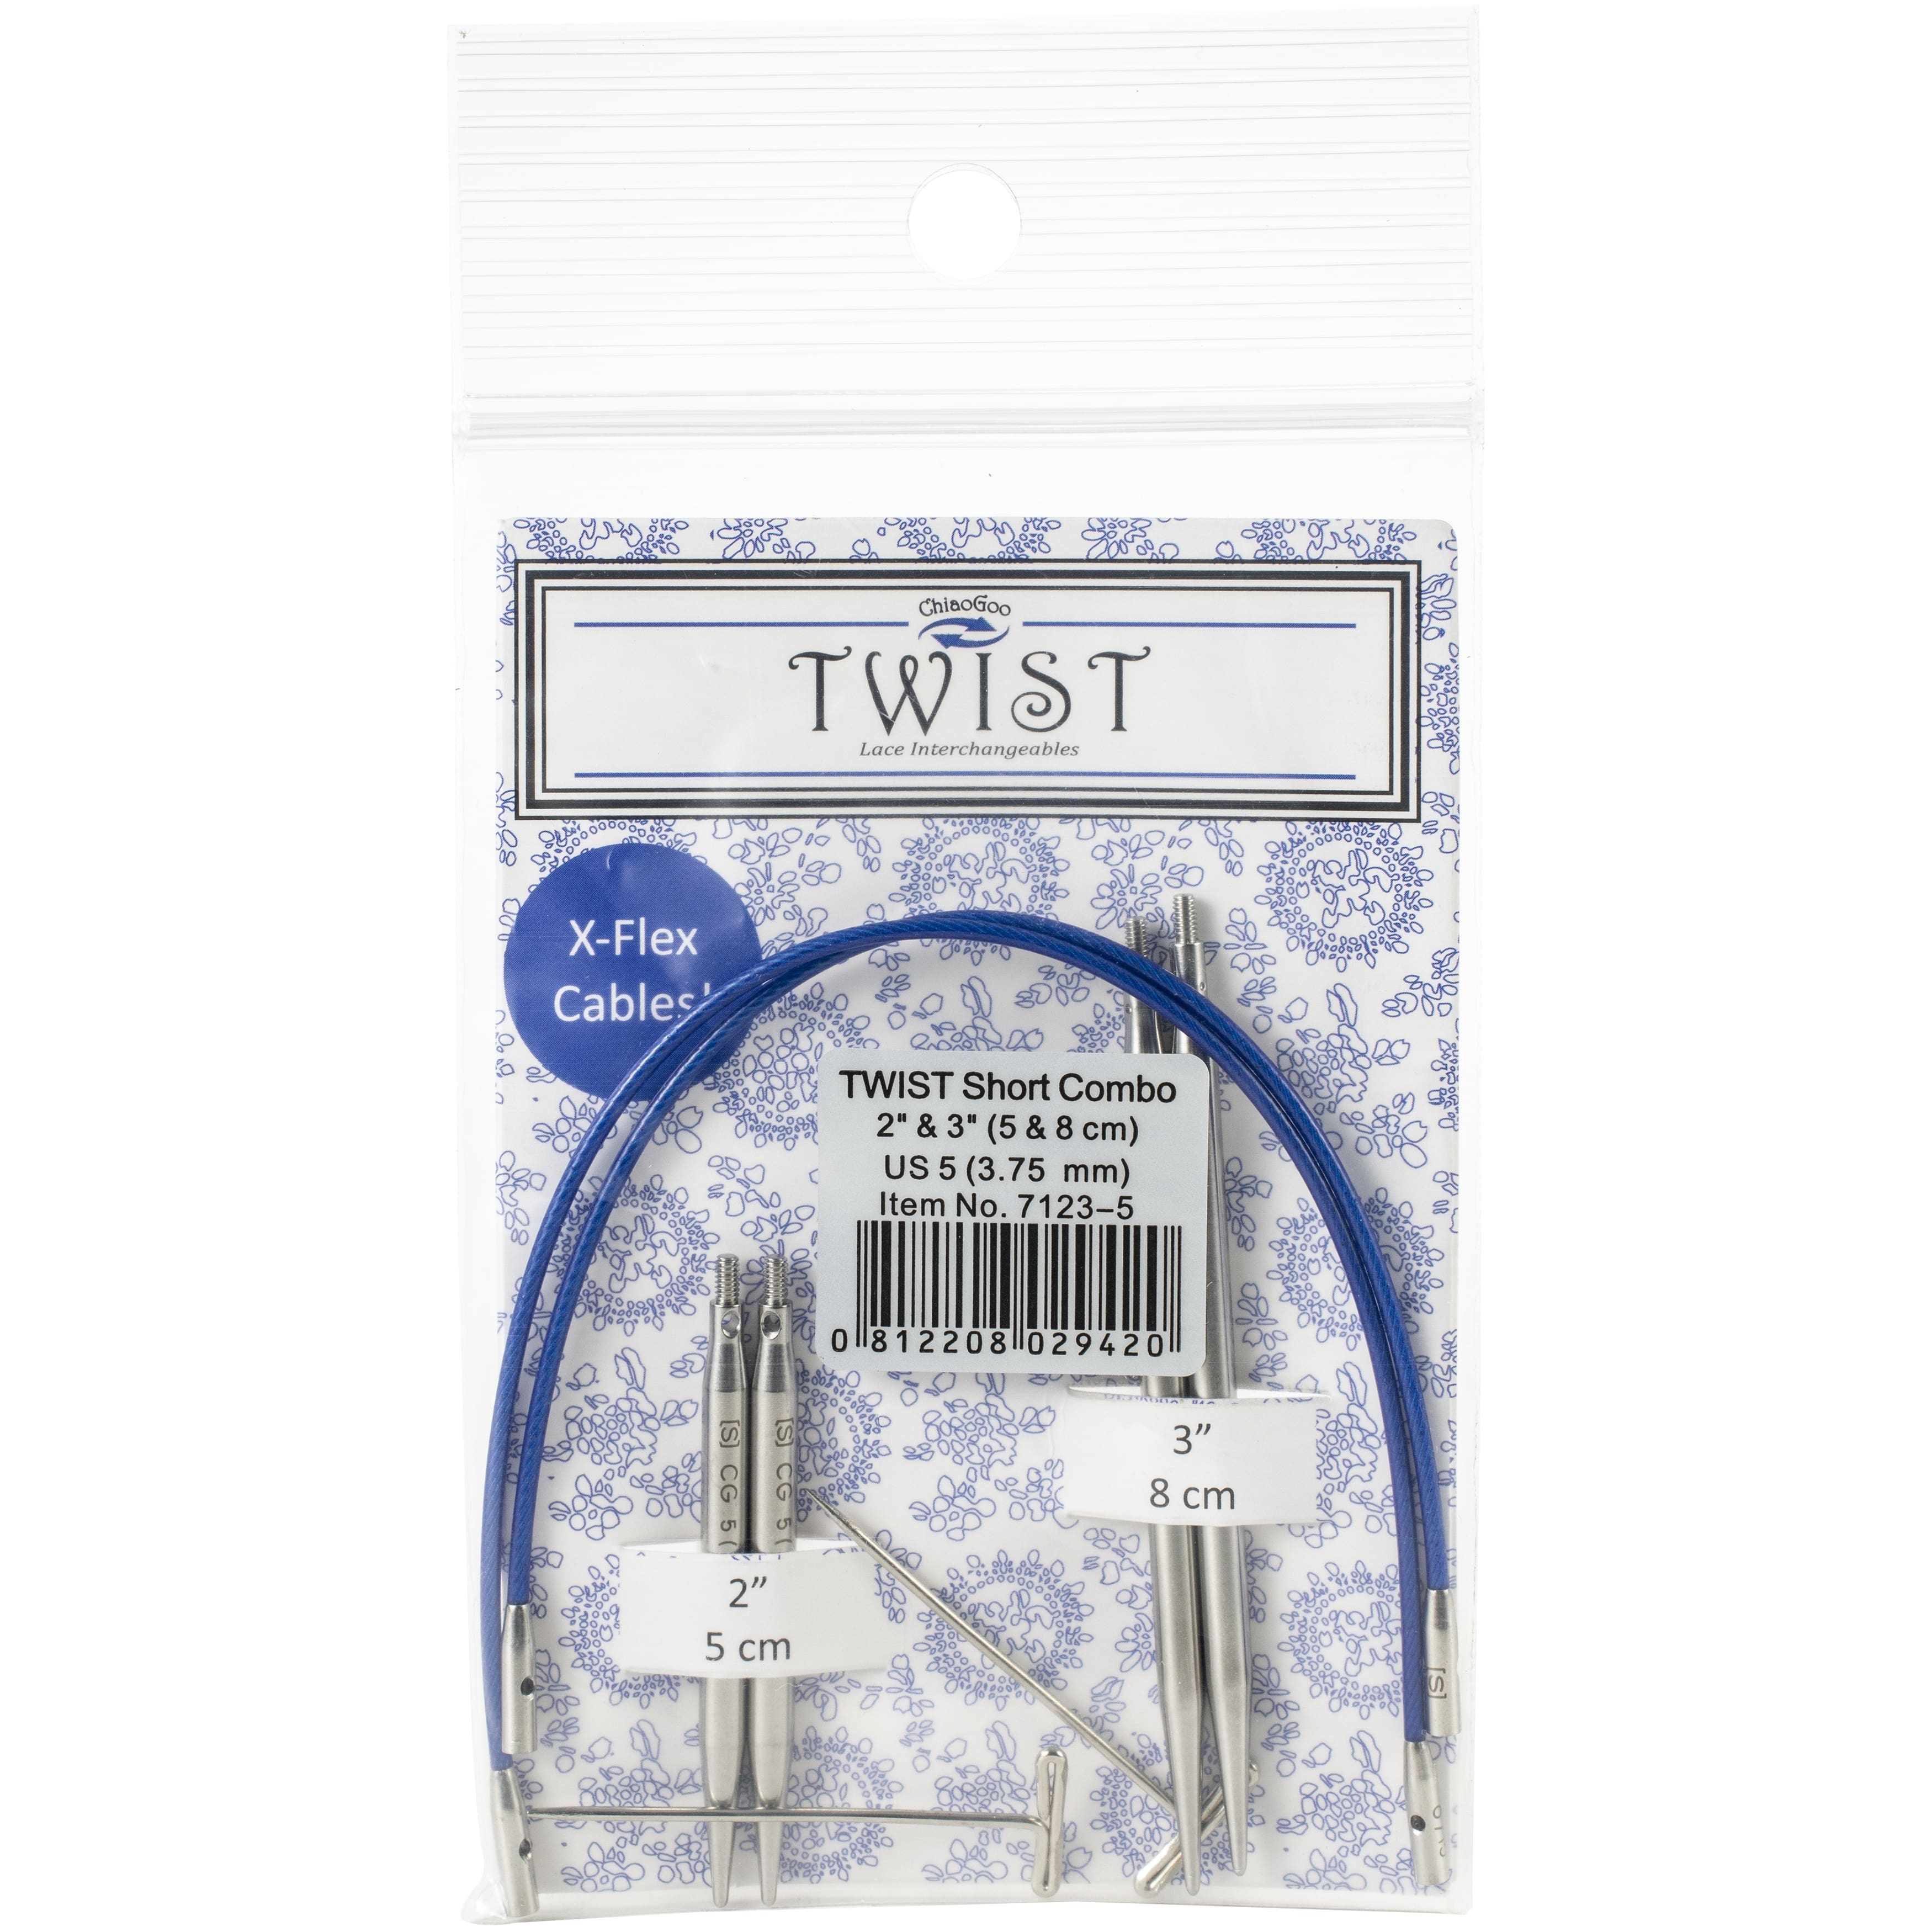 ChiaoGoo TWIST X-Flex Blue - [S] Small Interchangeable Cables - For US-2  (2.75 mm) to US-8 (5 mm) Tips